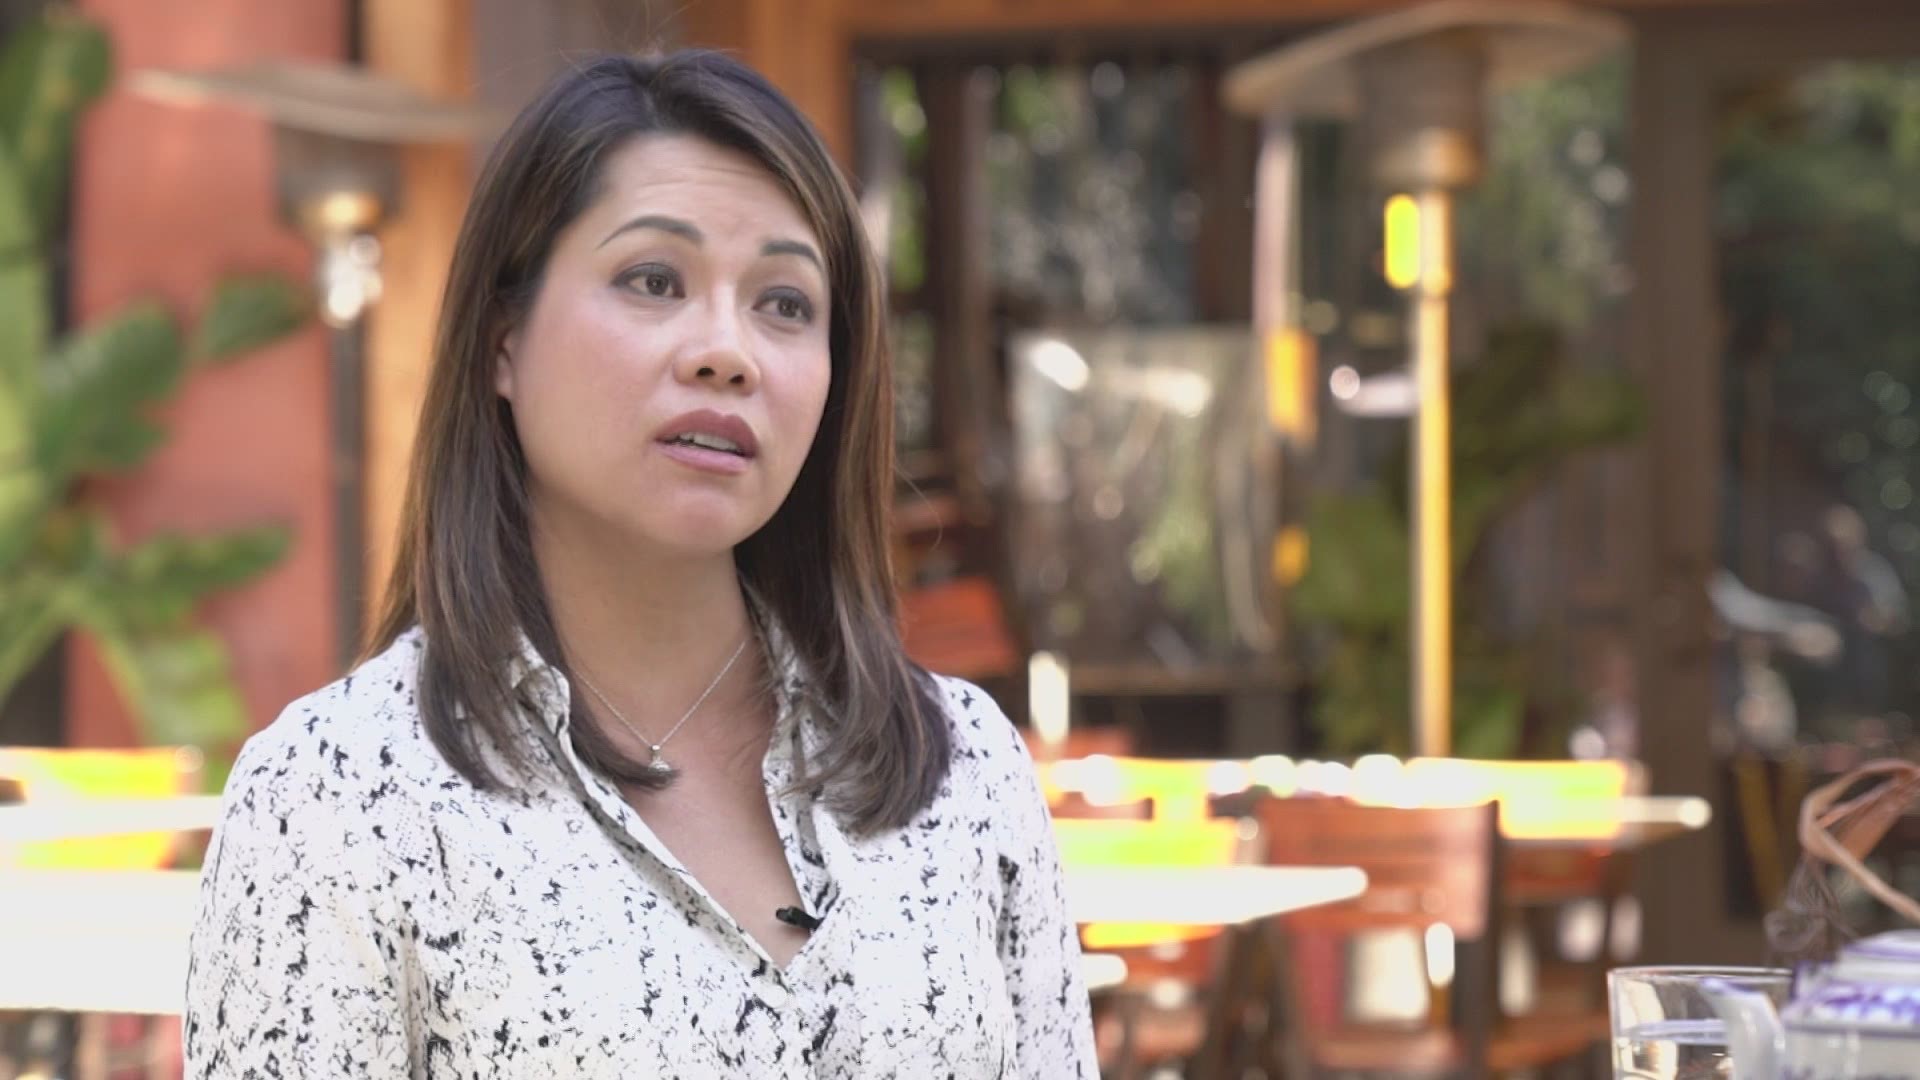 Taylor Hoang has become somewhat of a civic activist for businesses run by people of color, arguing against multiple Seattle policies like the head tax.